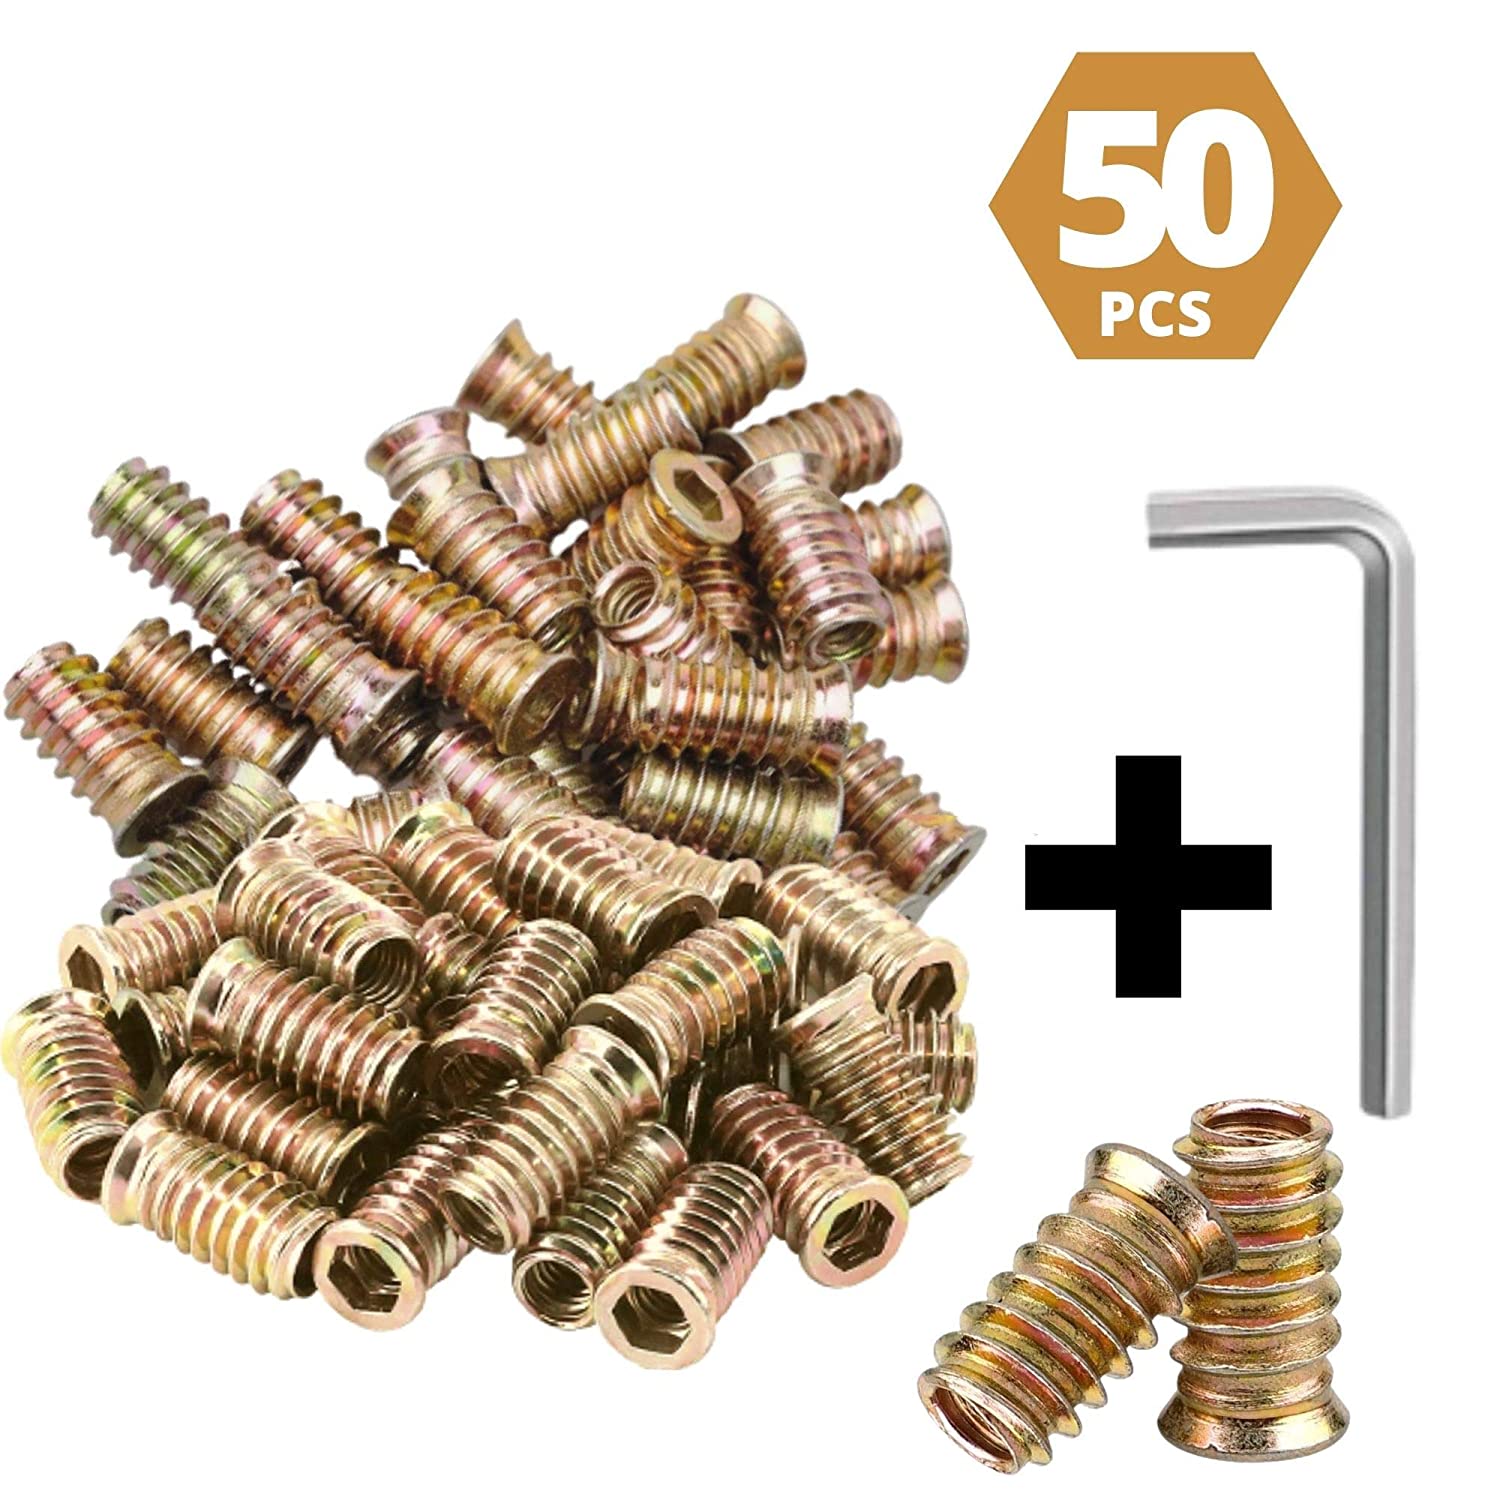 PERFORMORE 50 Pack of Silver Aluminum Screw Posts, 1 1/4 Inch Metal Chicago  Screw Post Binding Screws for Scrapbooking, Photo Albums, Binding, Leather  Screw Nail Rivet Button Solid Belt Tack Screw 